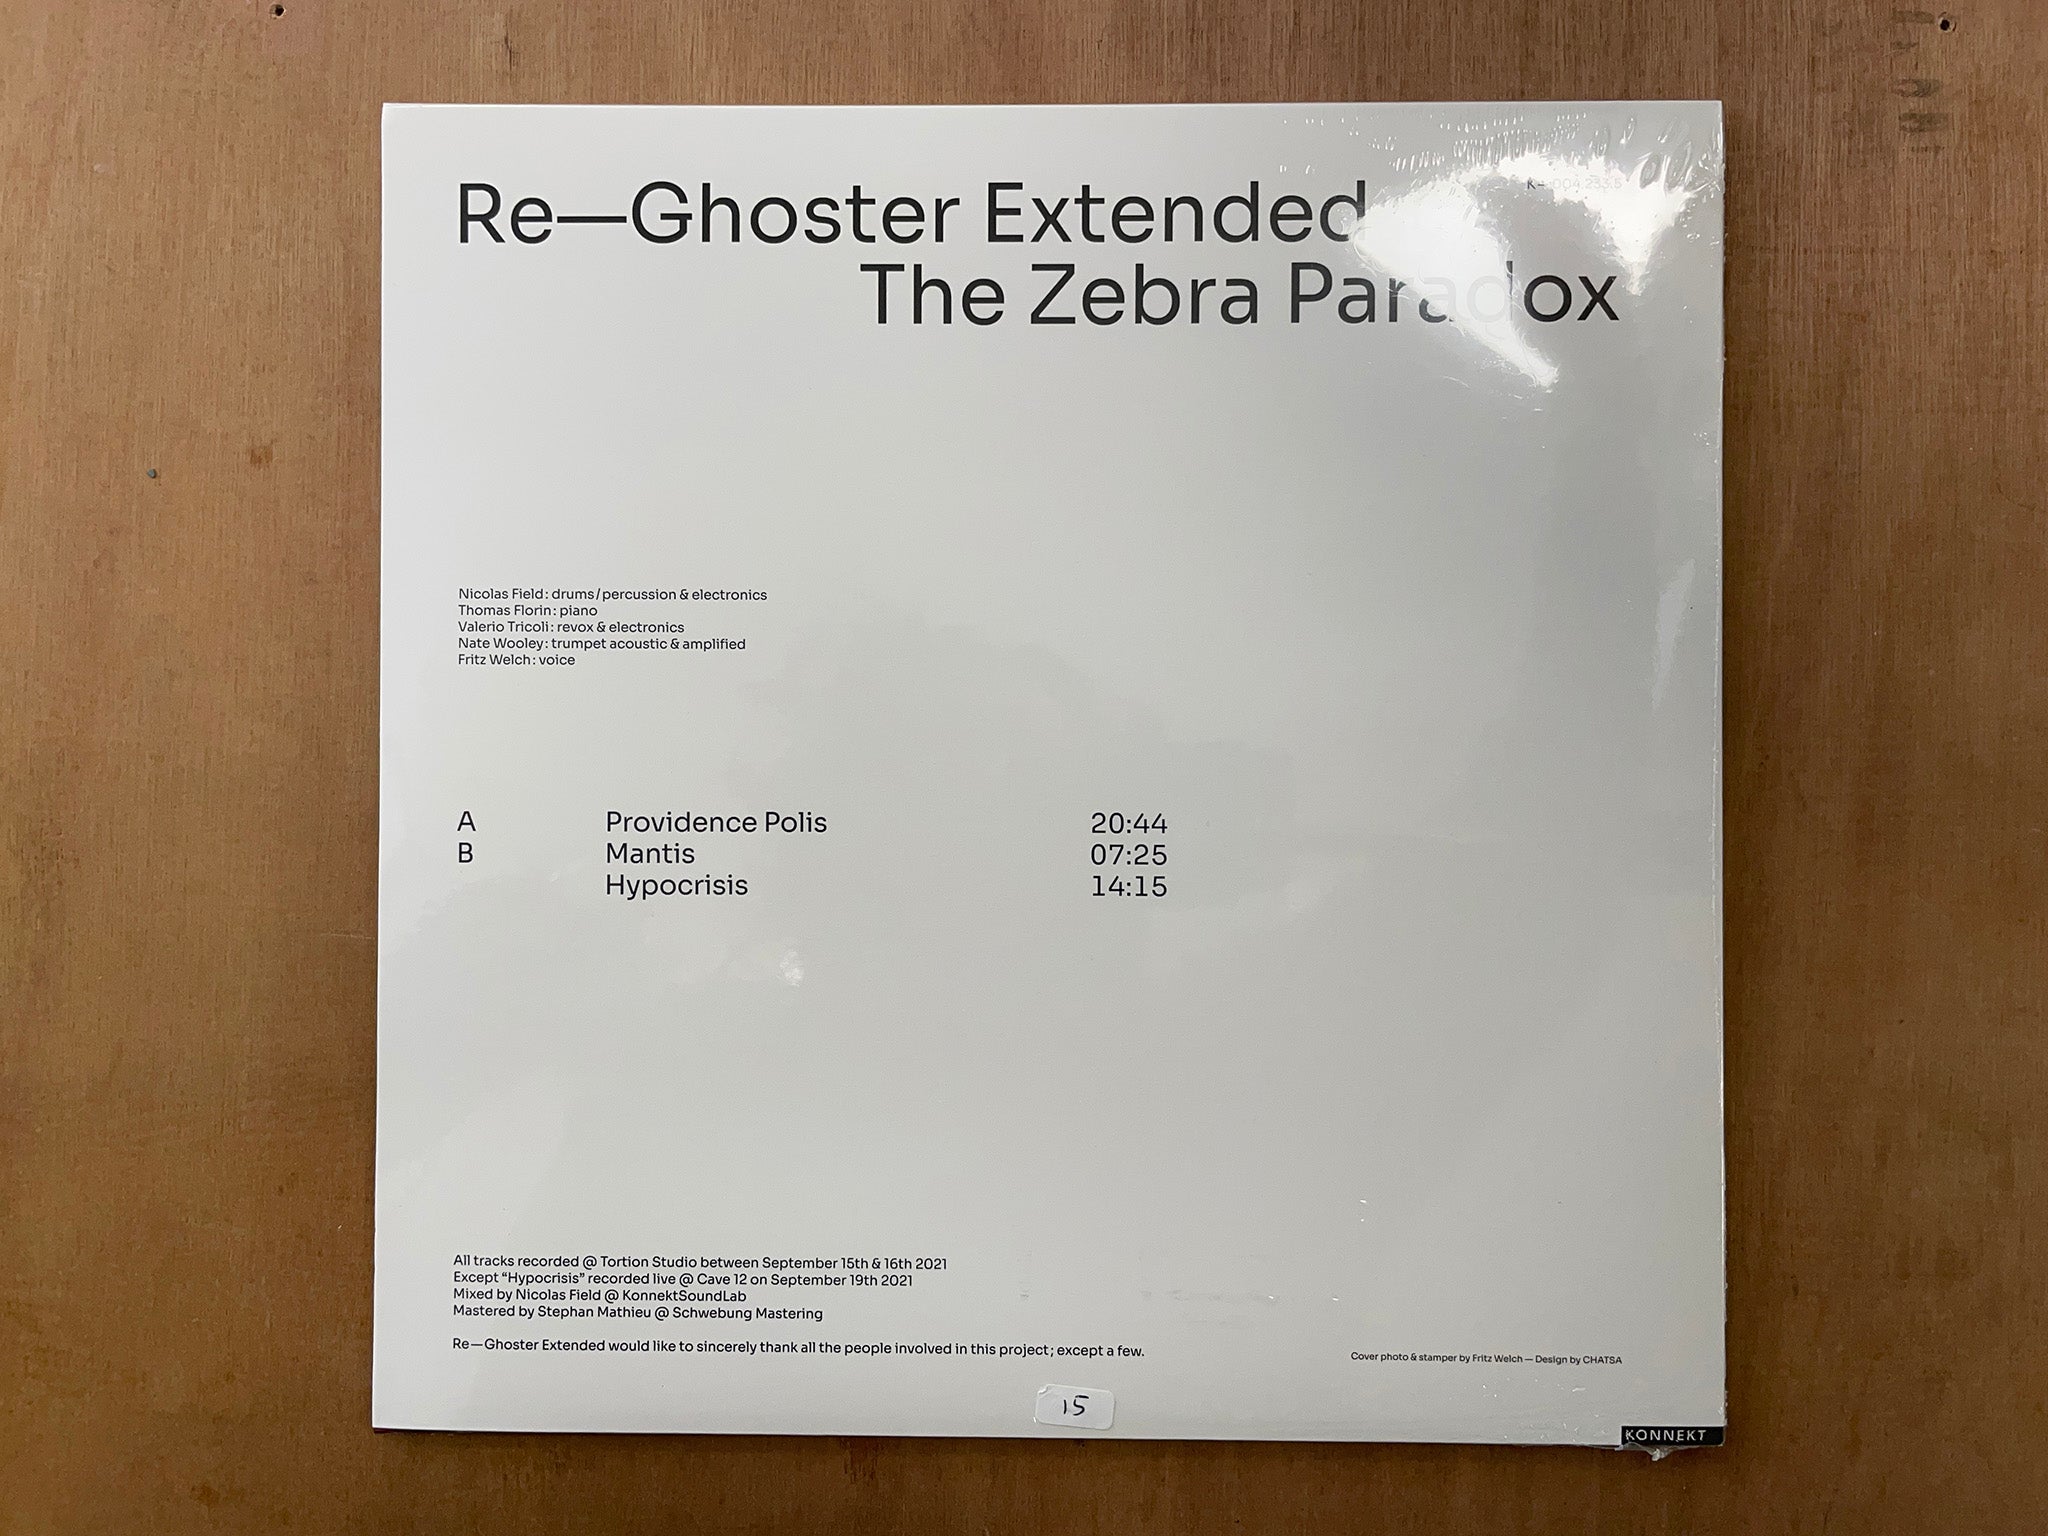 THE ZEBRA PARADOX by Re-Ghoster Extended